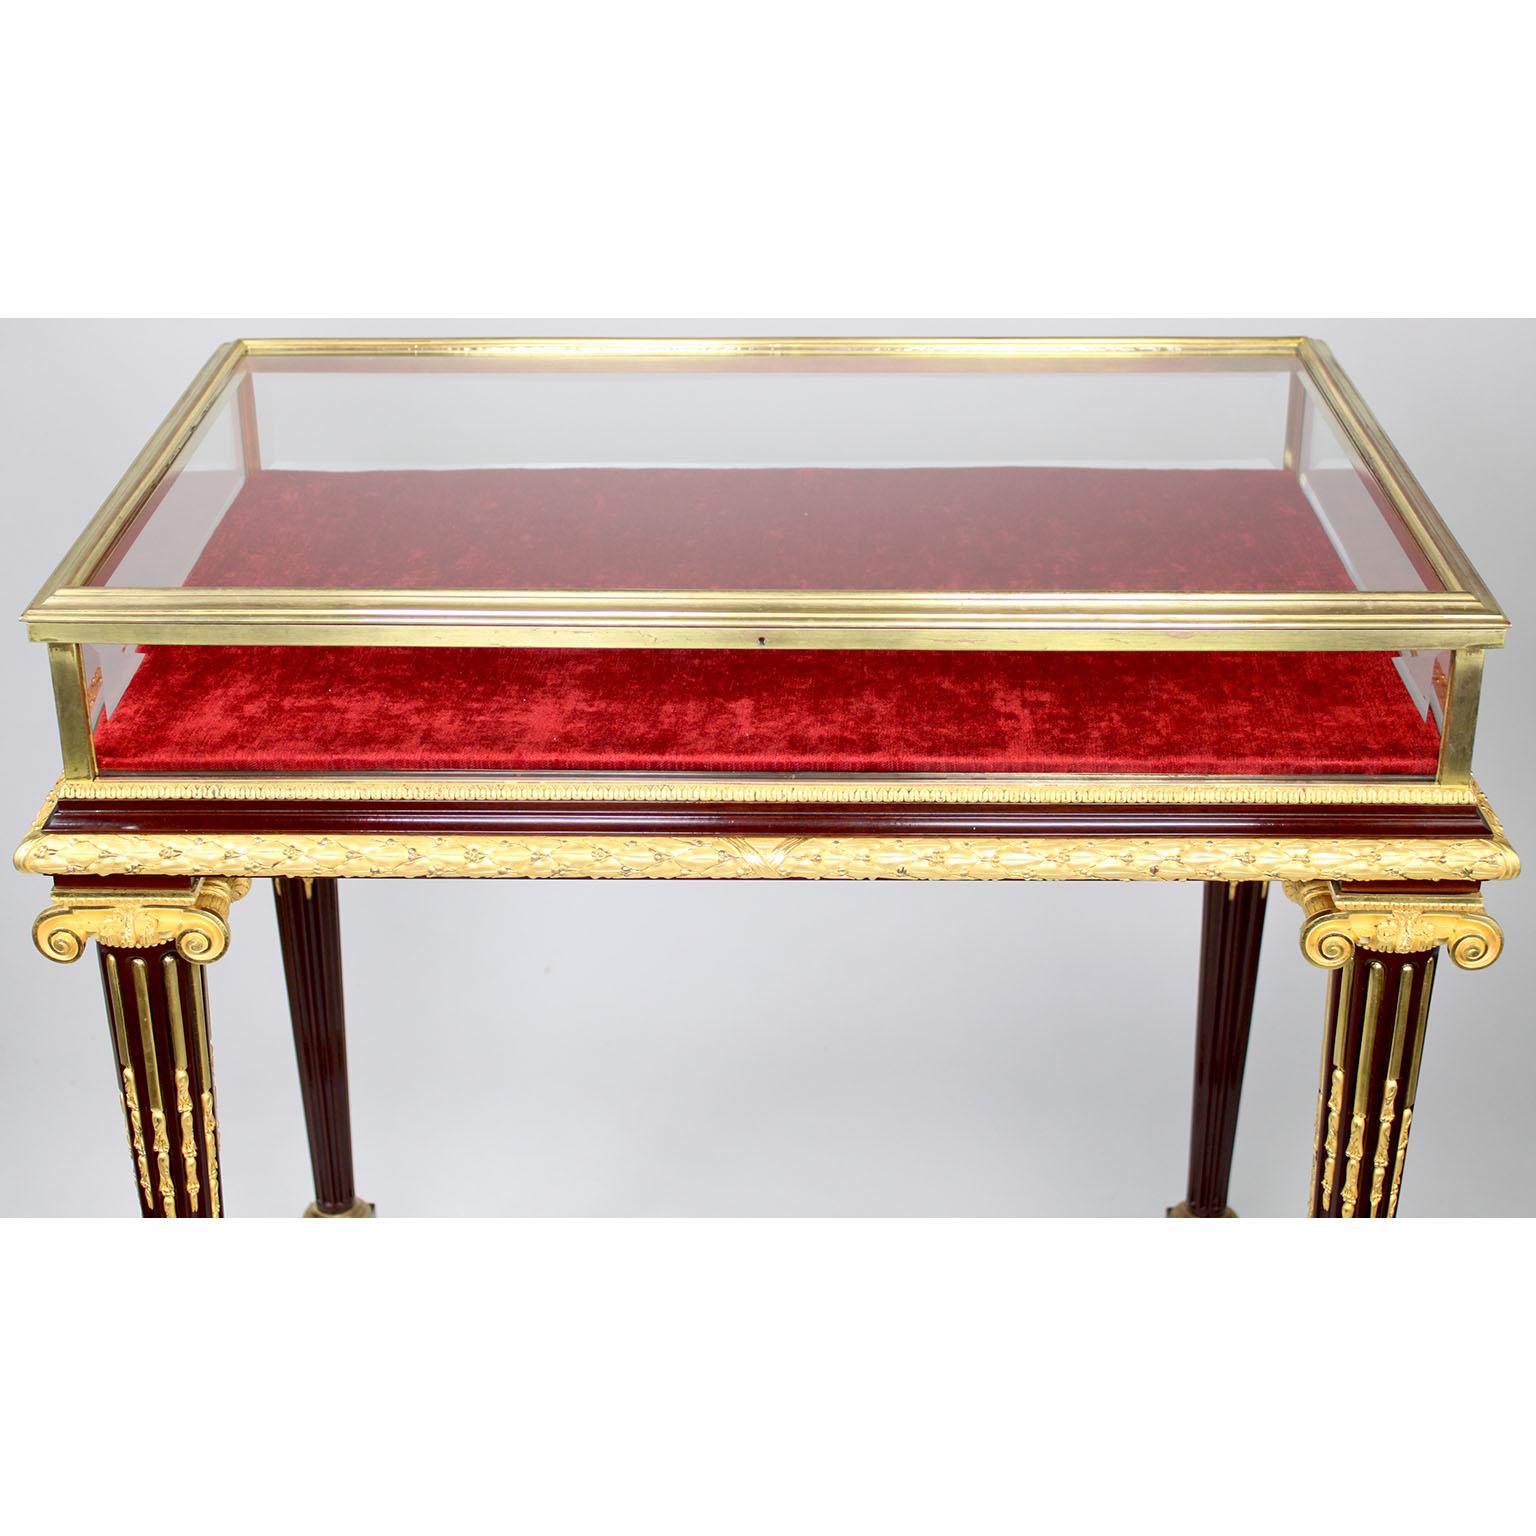 Louis XVI Style Mahogany & Ormolu Mounted Bijouterie Vitrine Table -Henri Dasson In Good Condition For Sale In Los Angeles, CA